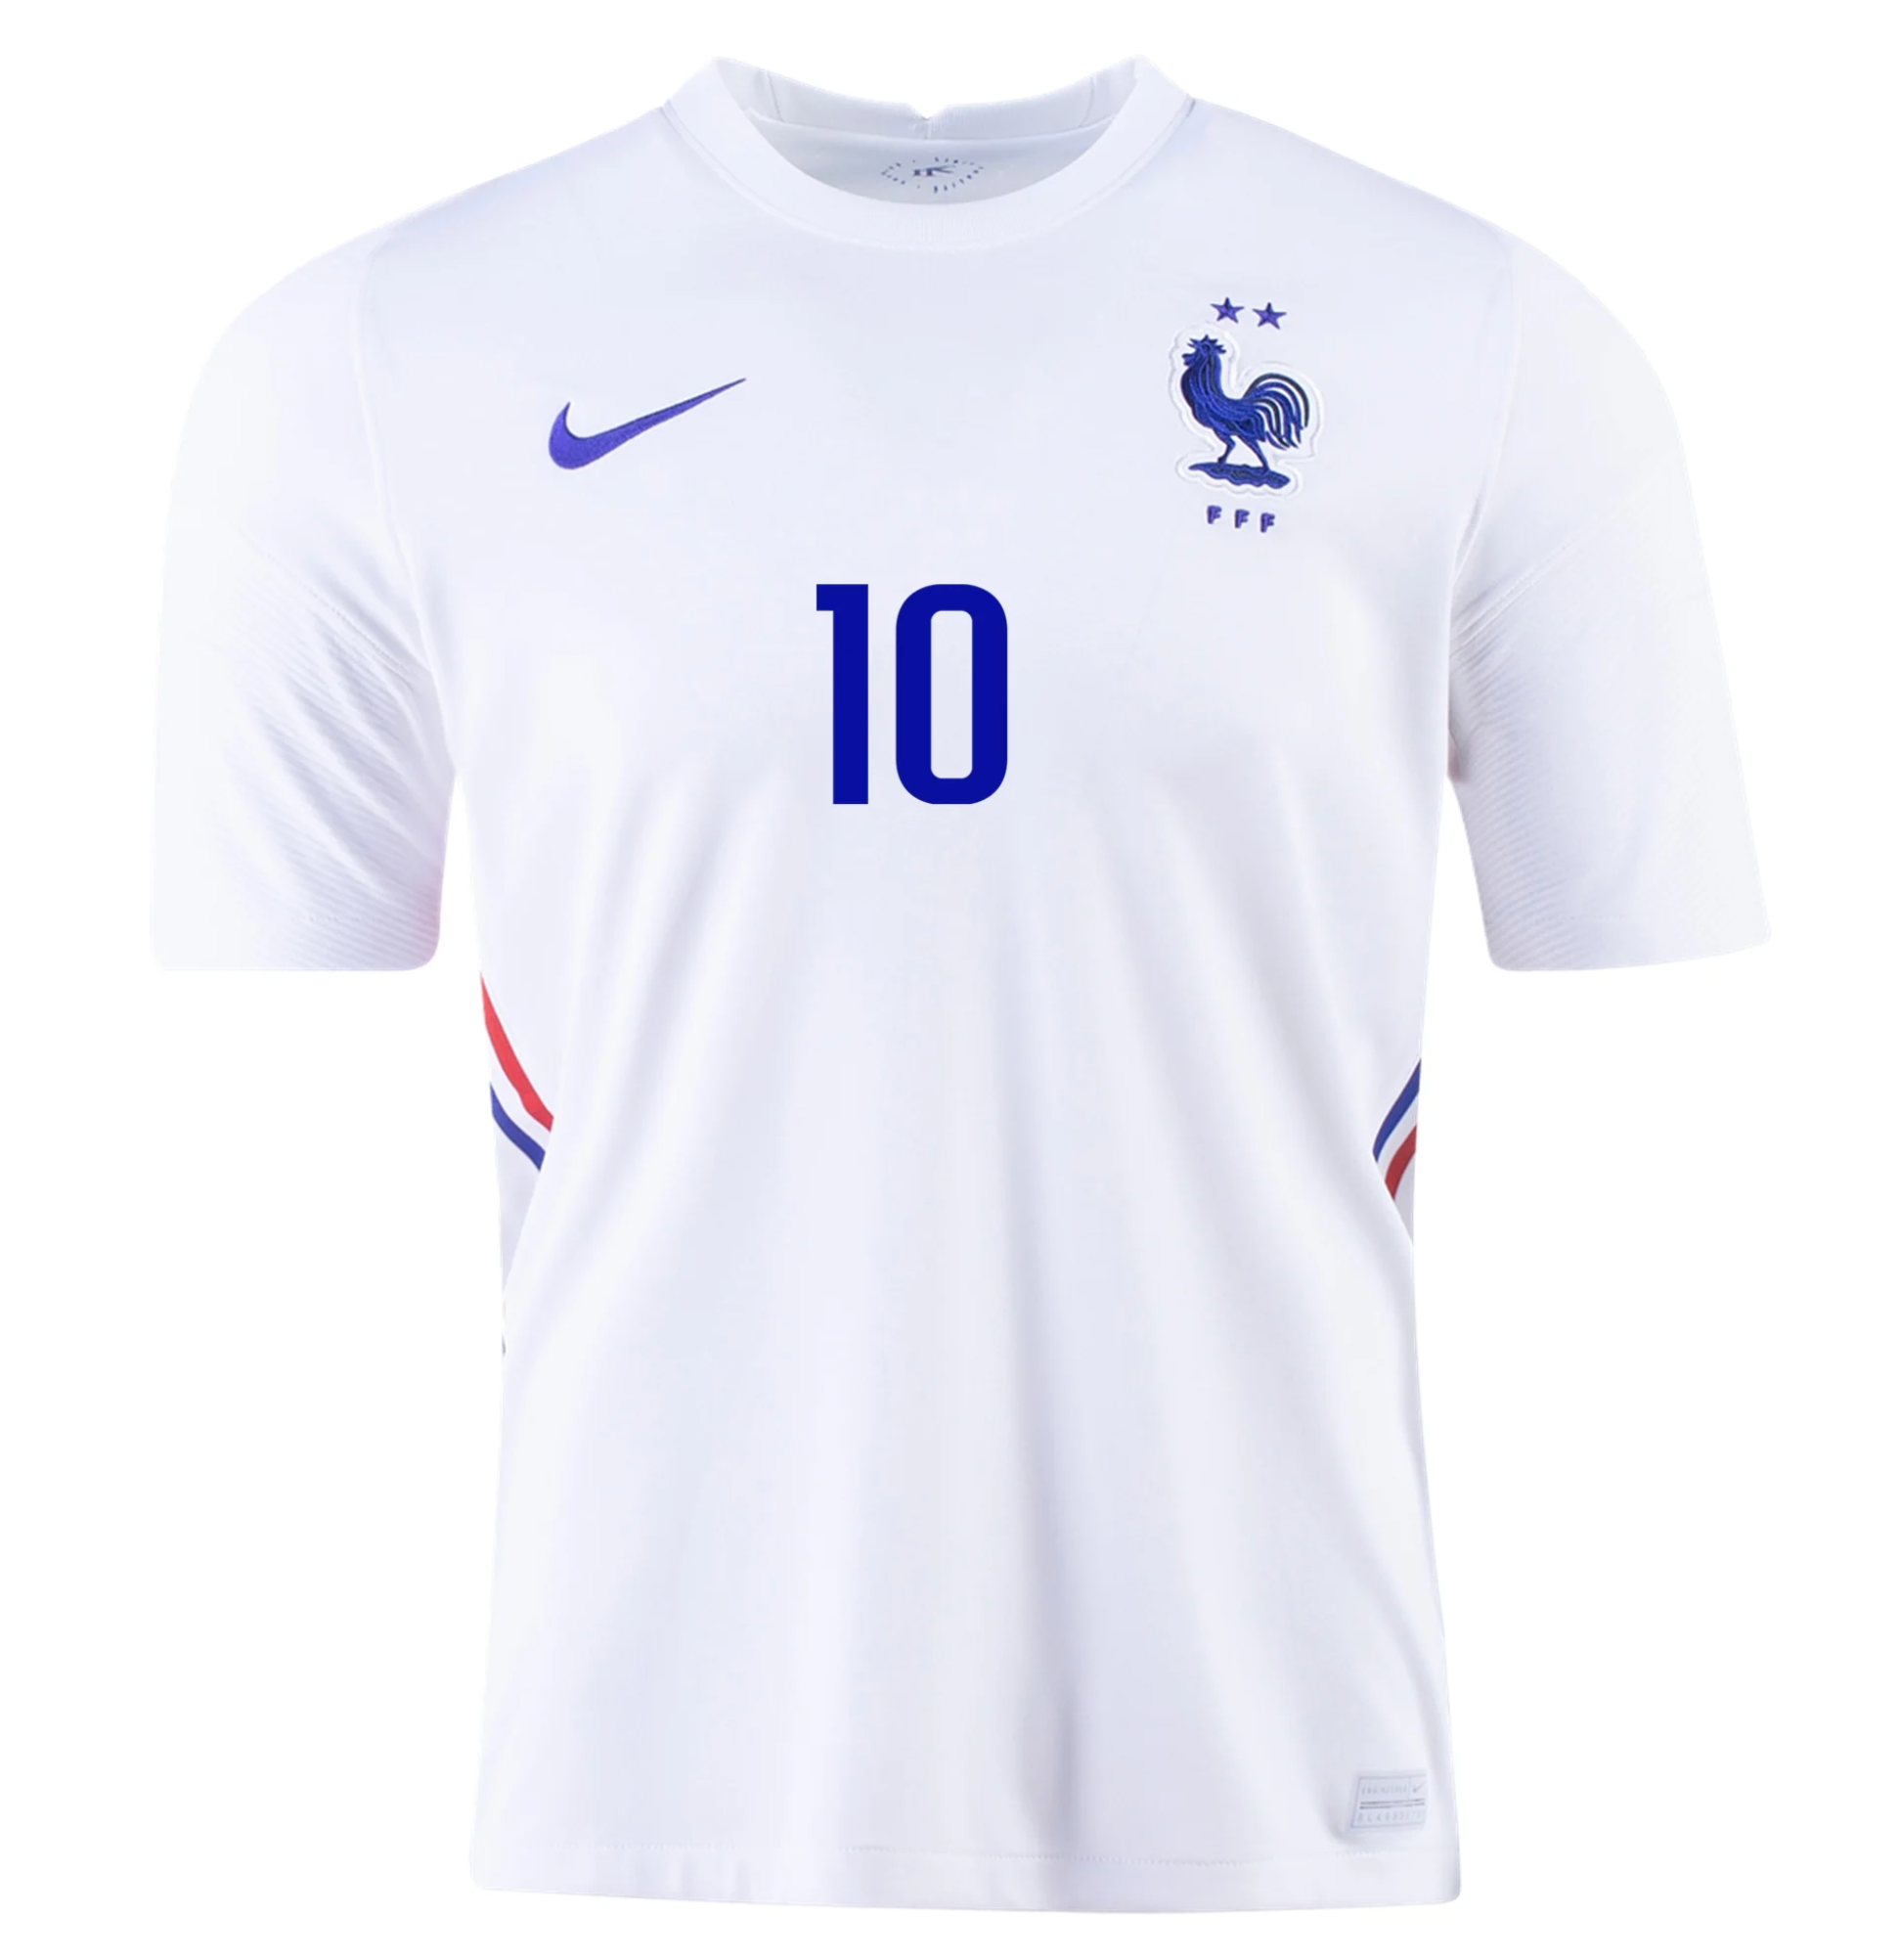 mbappe youth soccer jersey